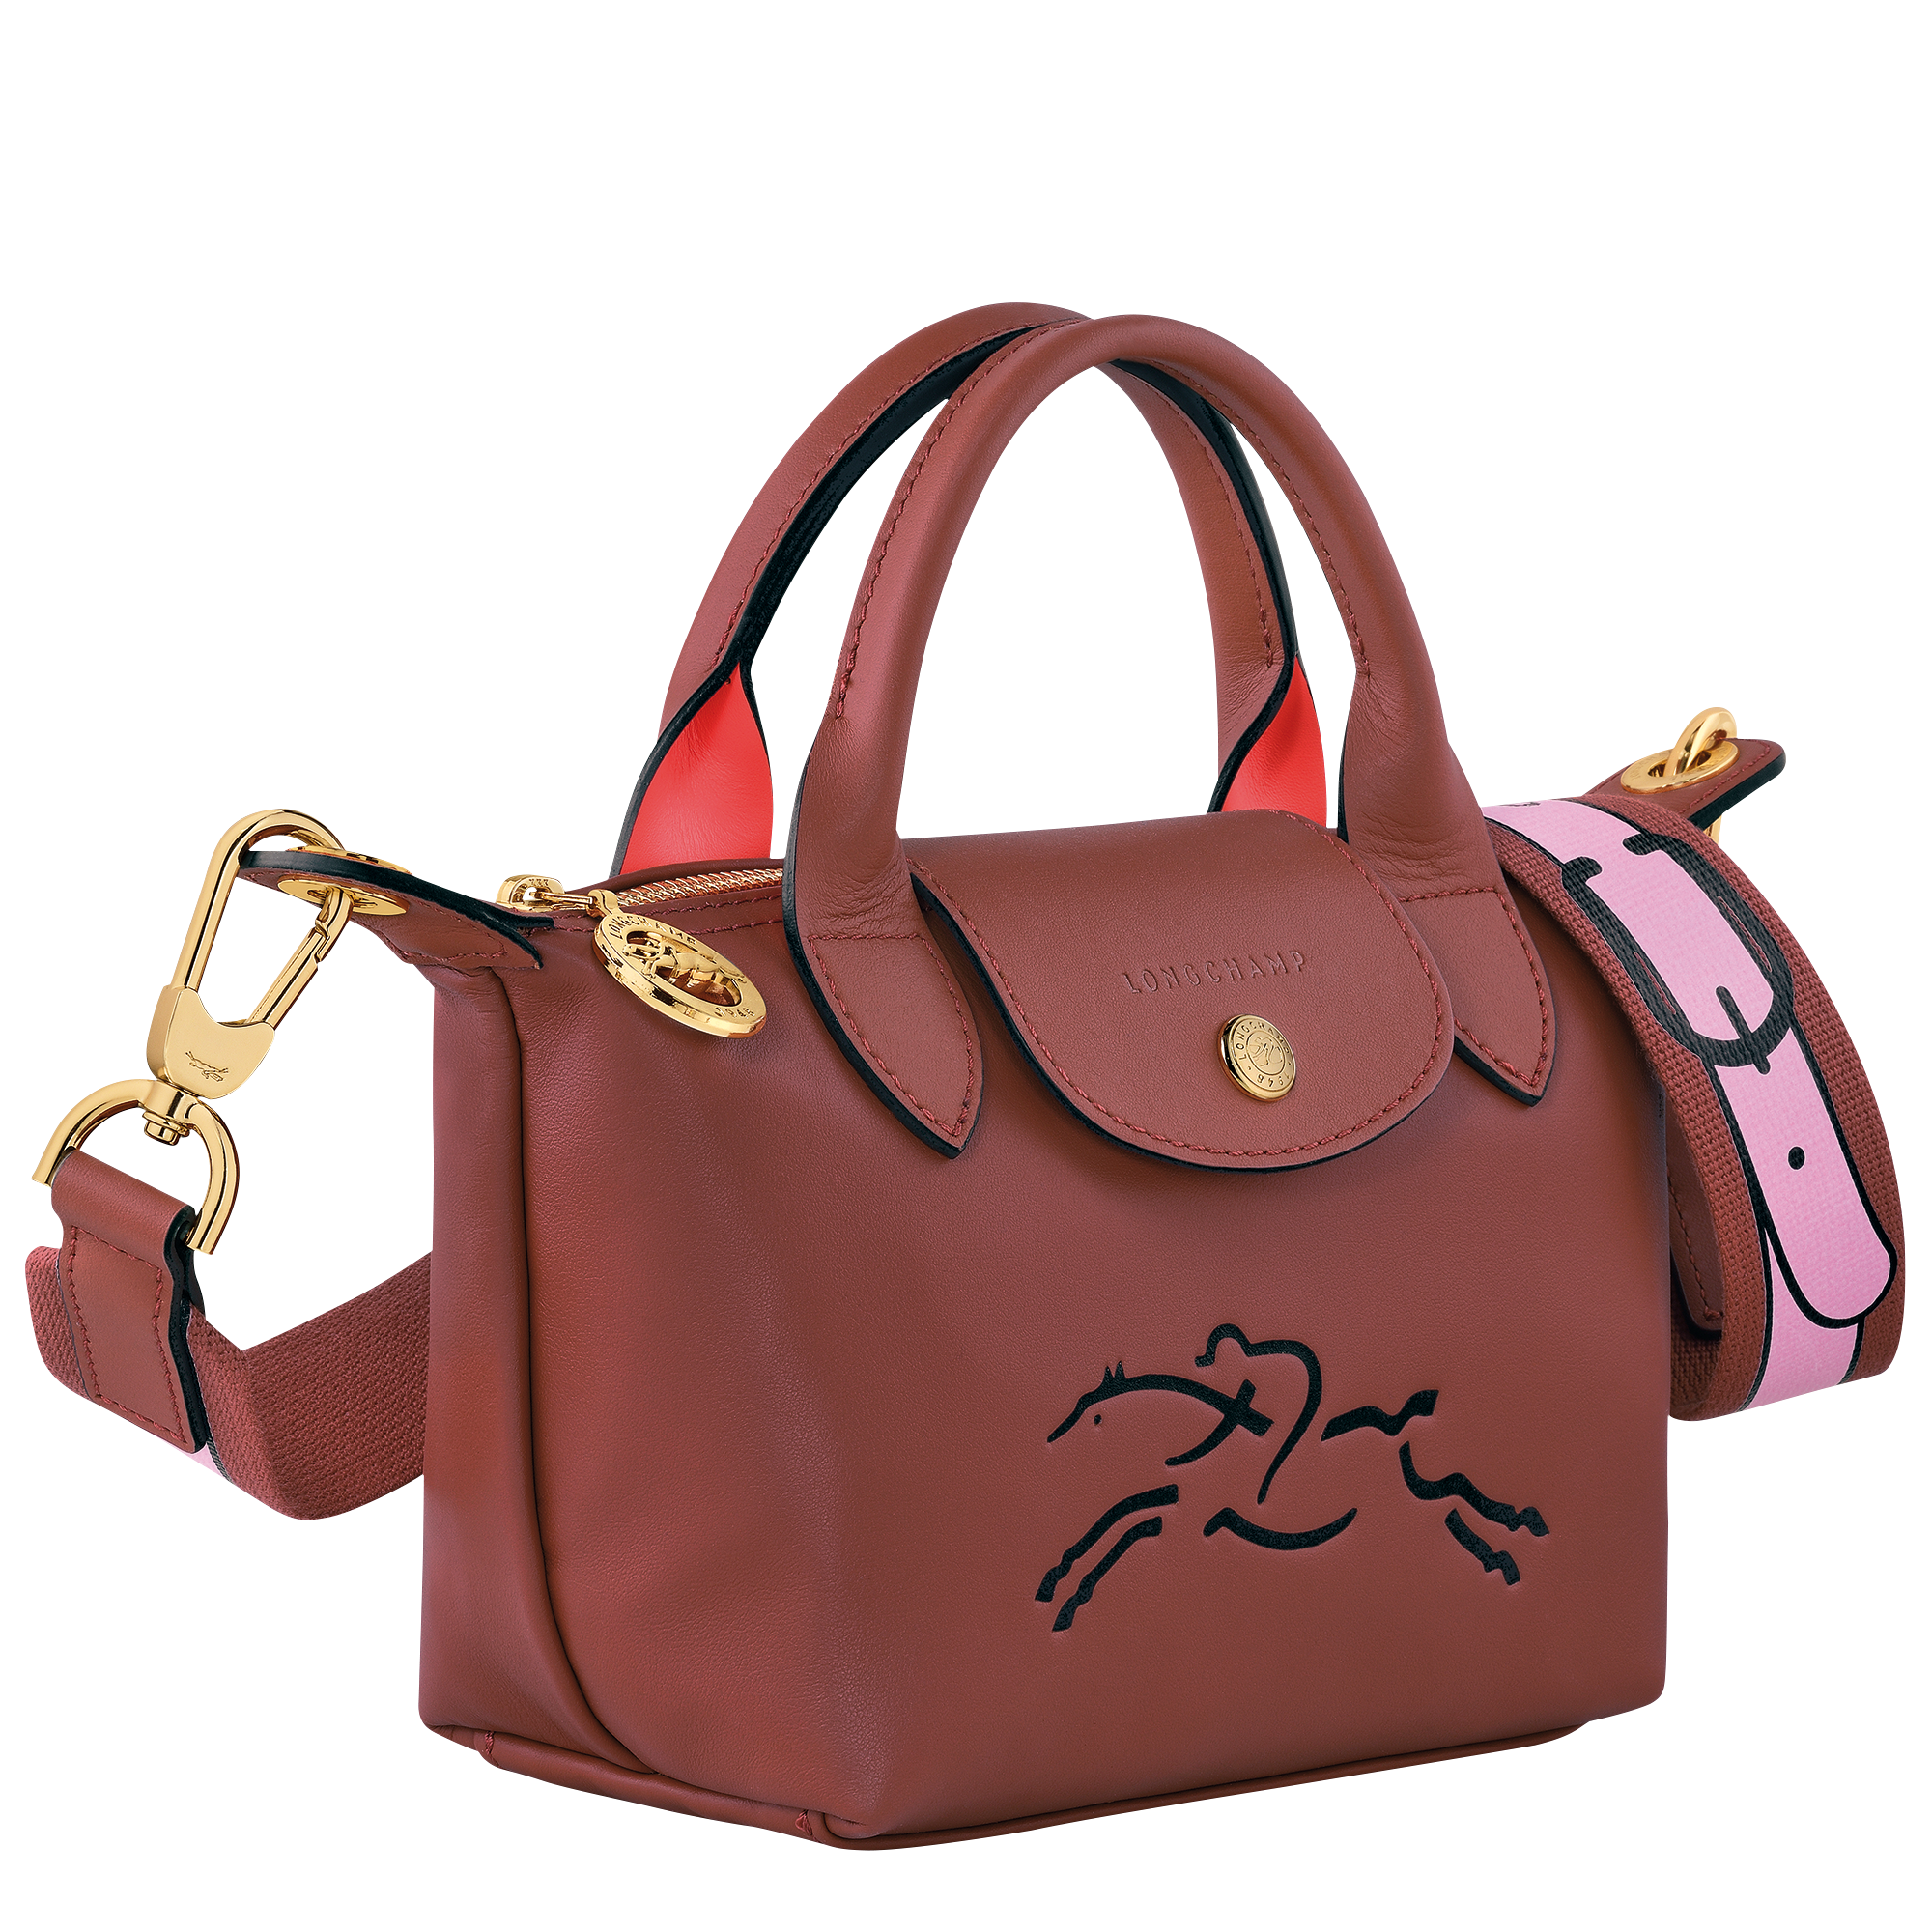 Longchamp Pliage Cuir XS from Vestiaire Collective : r/handbags